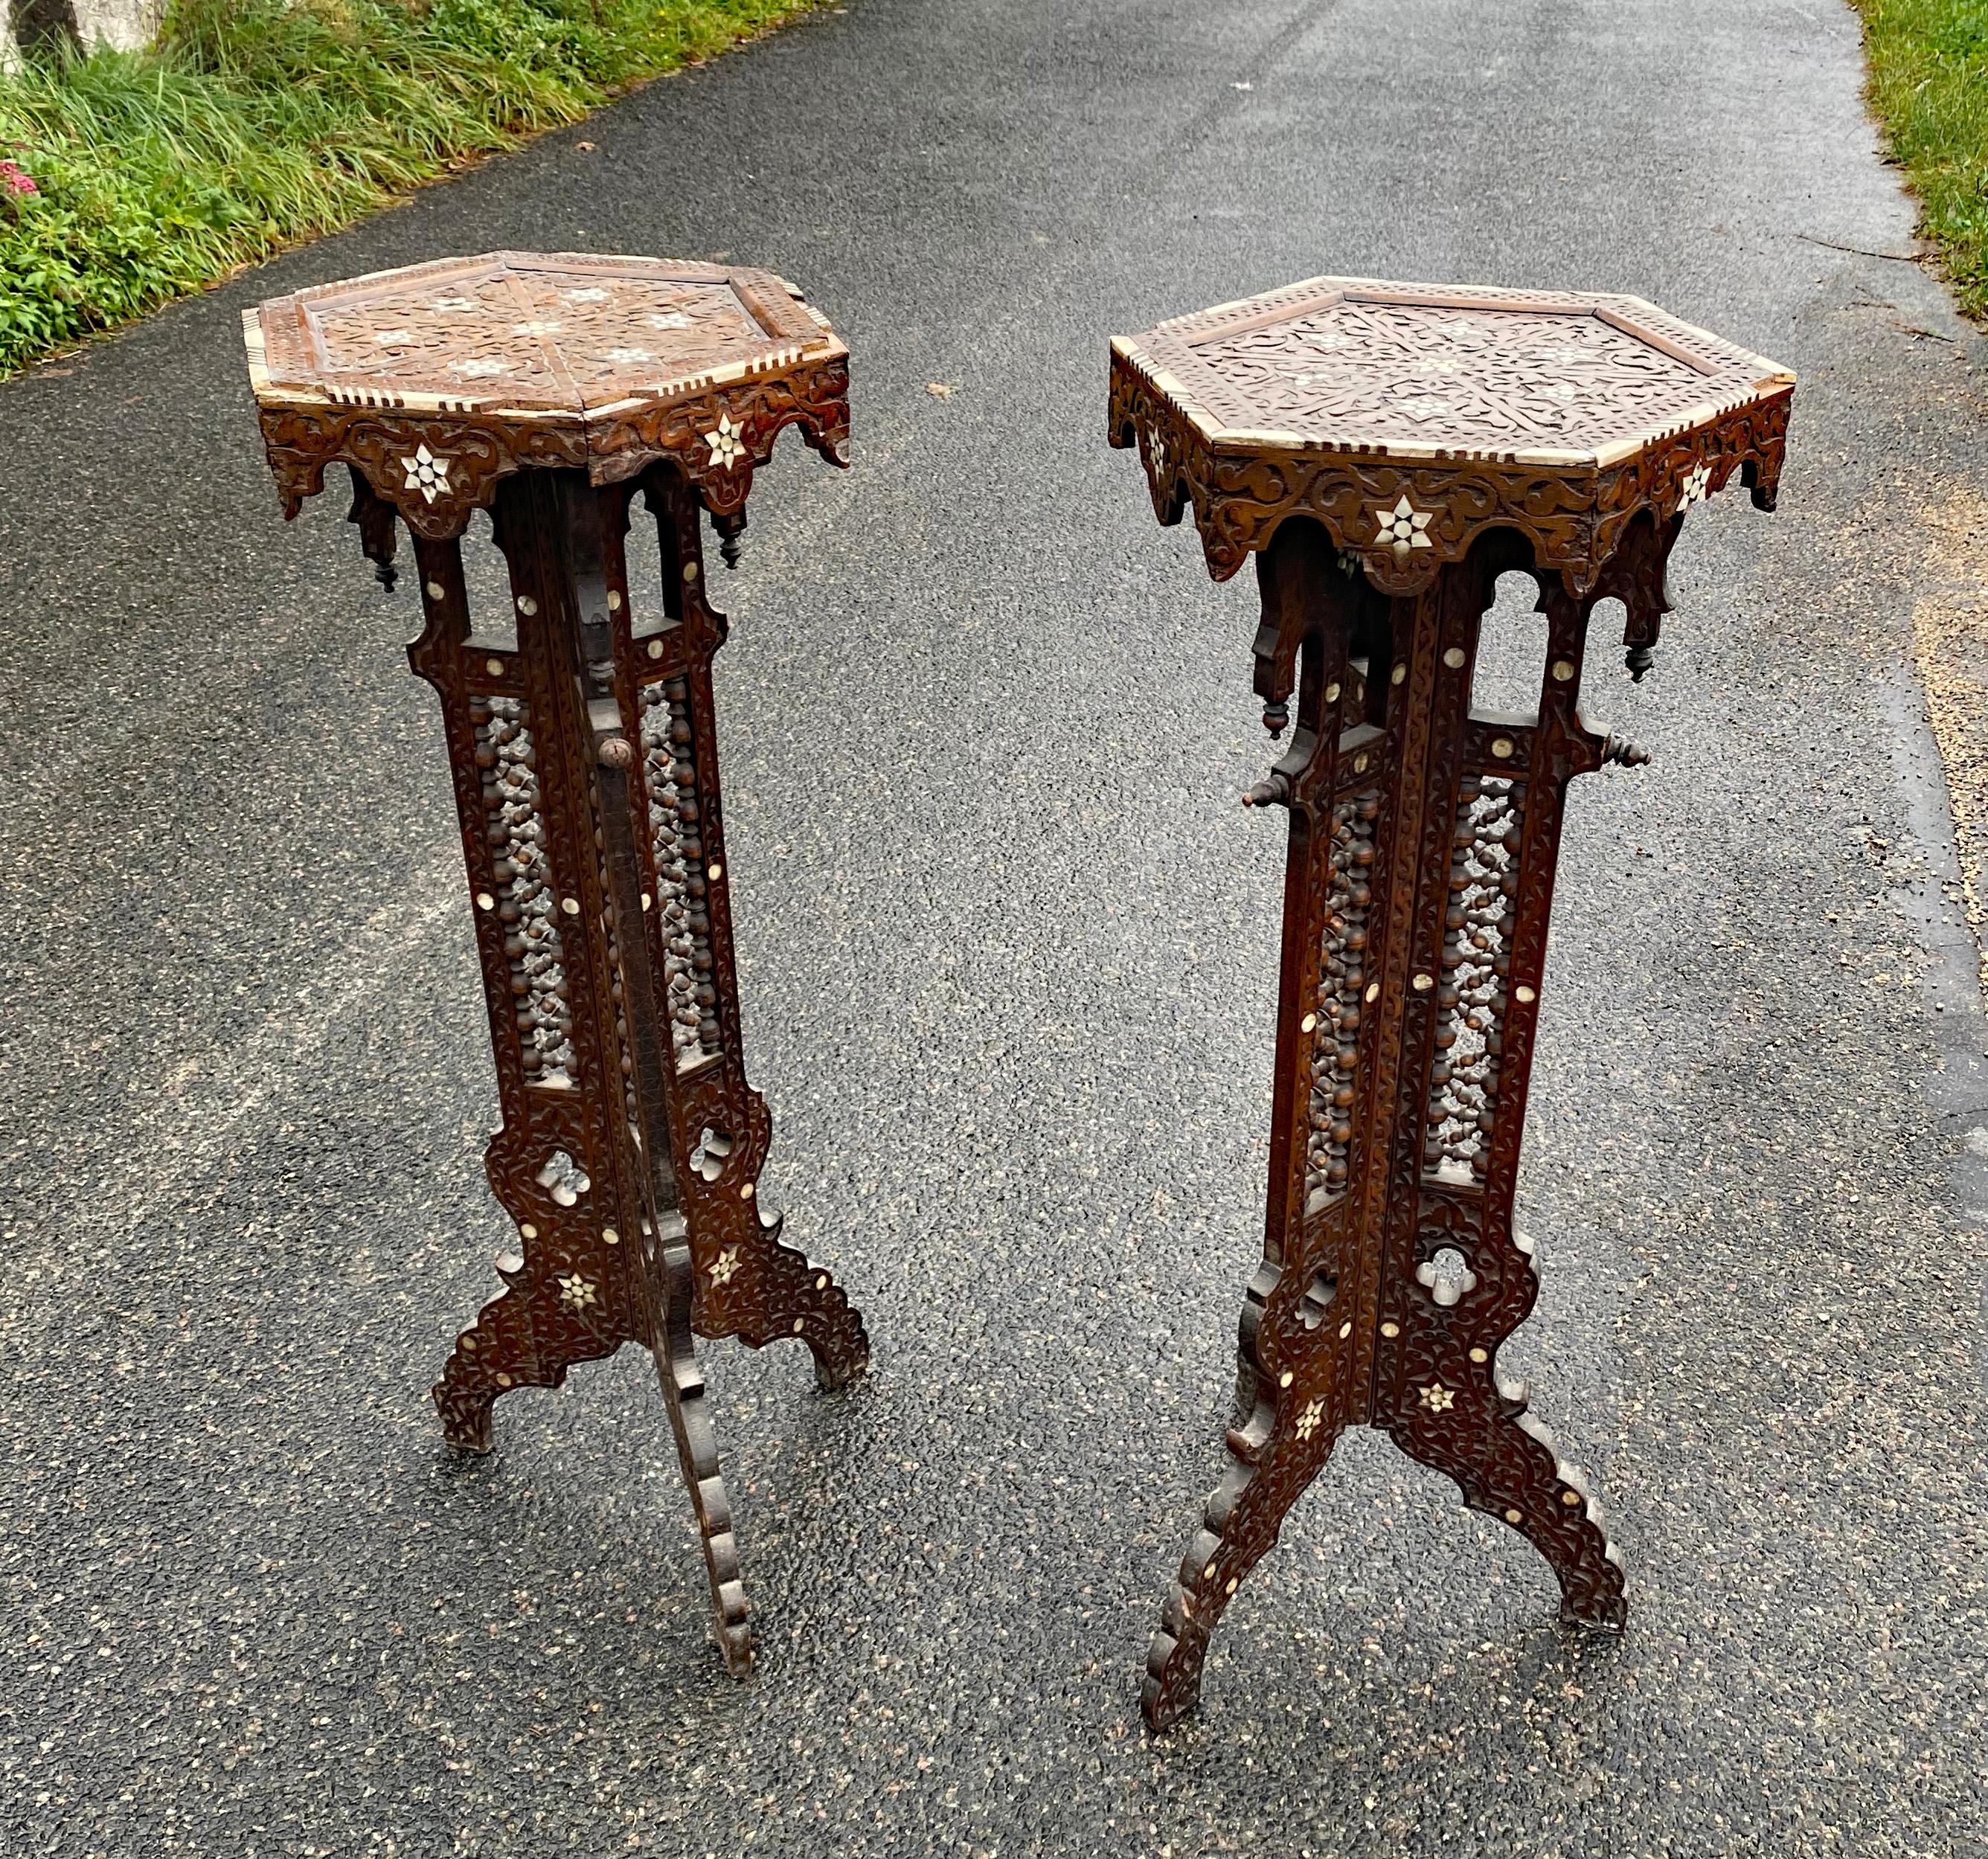 ancient oriental work, pair of carved wooden pedestals, bone and mother-of-pearl inlay
circa 1880
missing bones and mother-of-pearl